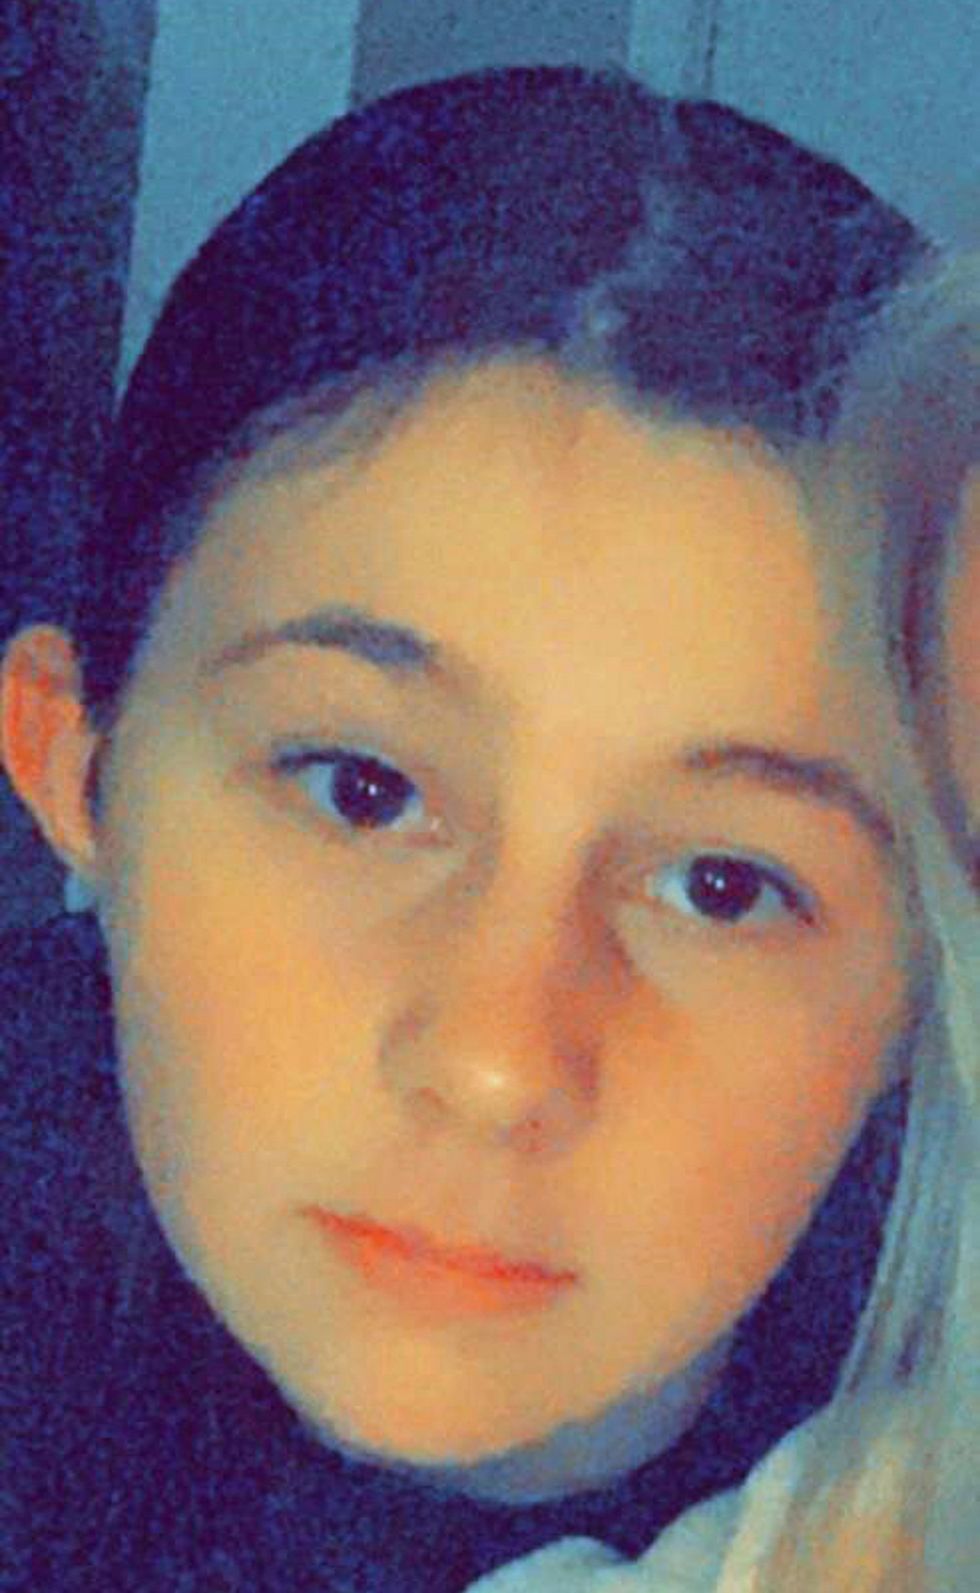 Undated handout picture issued by Merseyside Police of Ava White, 12, who has died following an incident in Liverpool city centre last night.